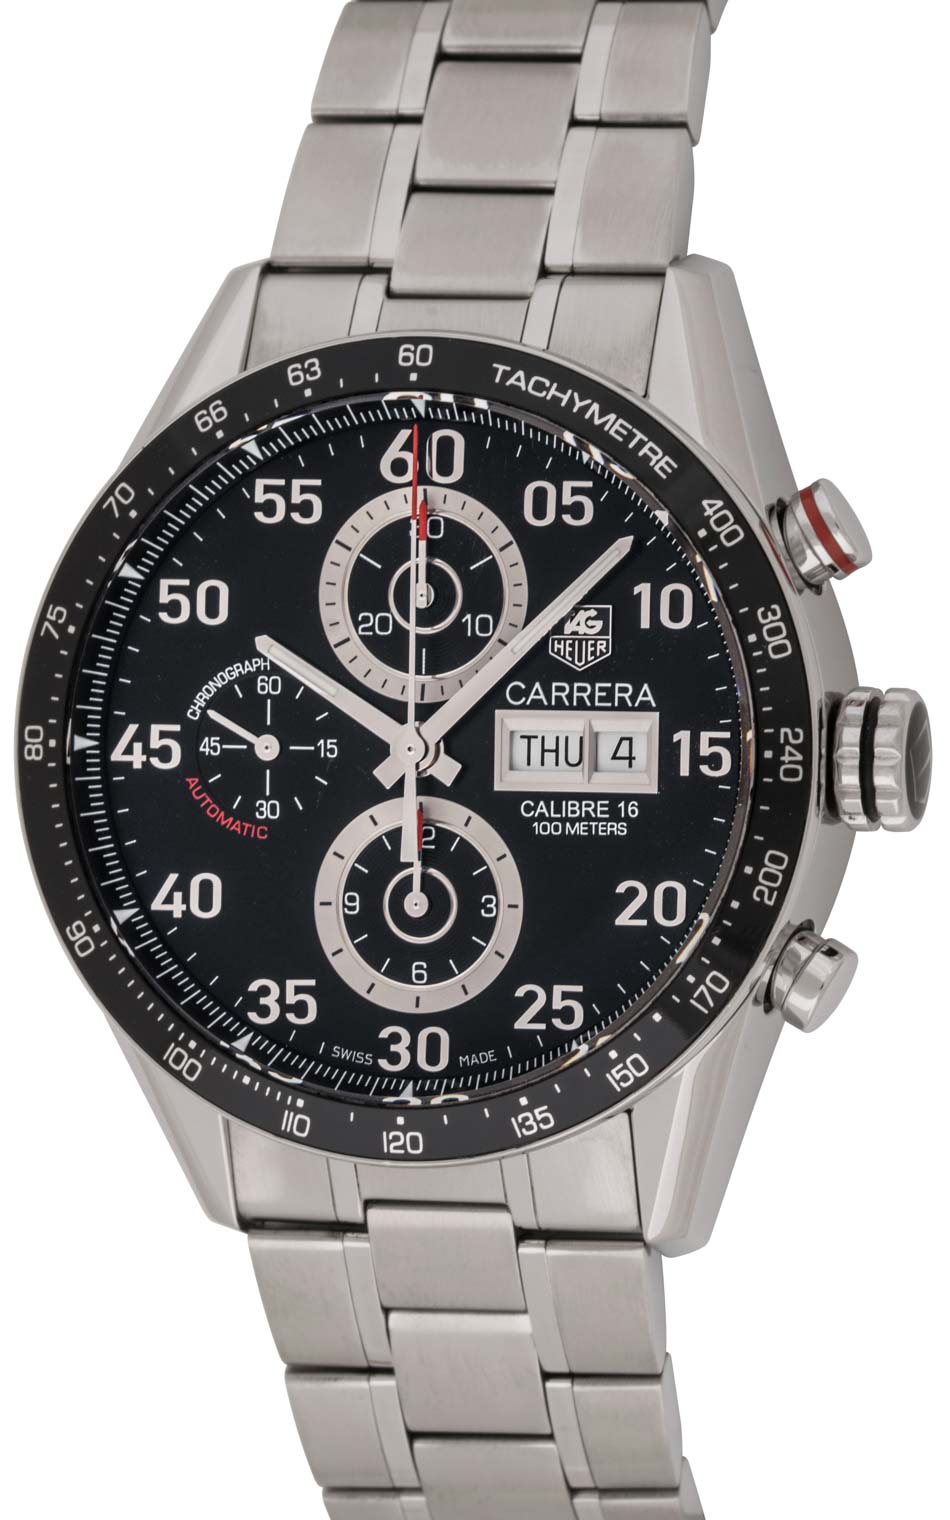 TAG Heuer - Carrera Chronograph Day-Date : CV2A10.BA0796 : SOLD OUT ...